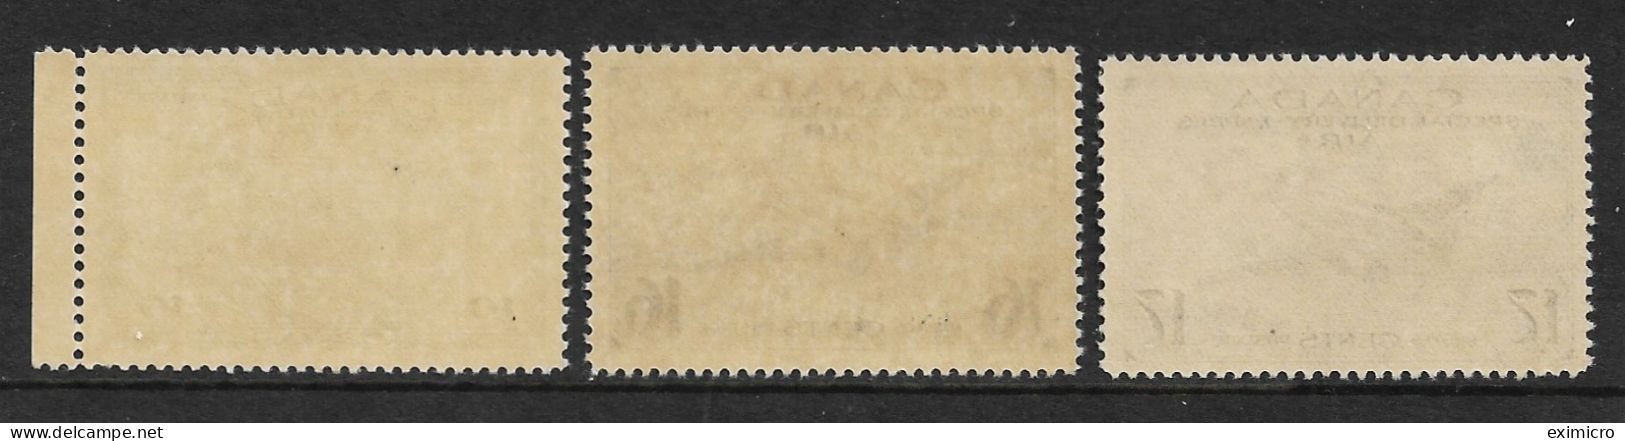 CANADA 1942 - 1943 WAR EFFORT SPECIAL DELIVERY SET SG S12/S14 UNMOUNTED MINT Cat £24+ - Exprès